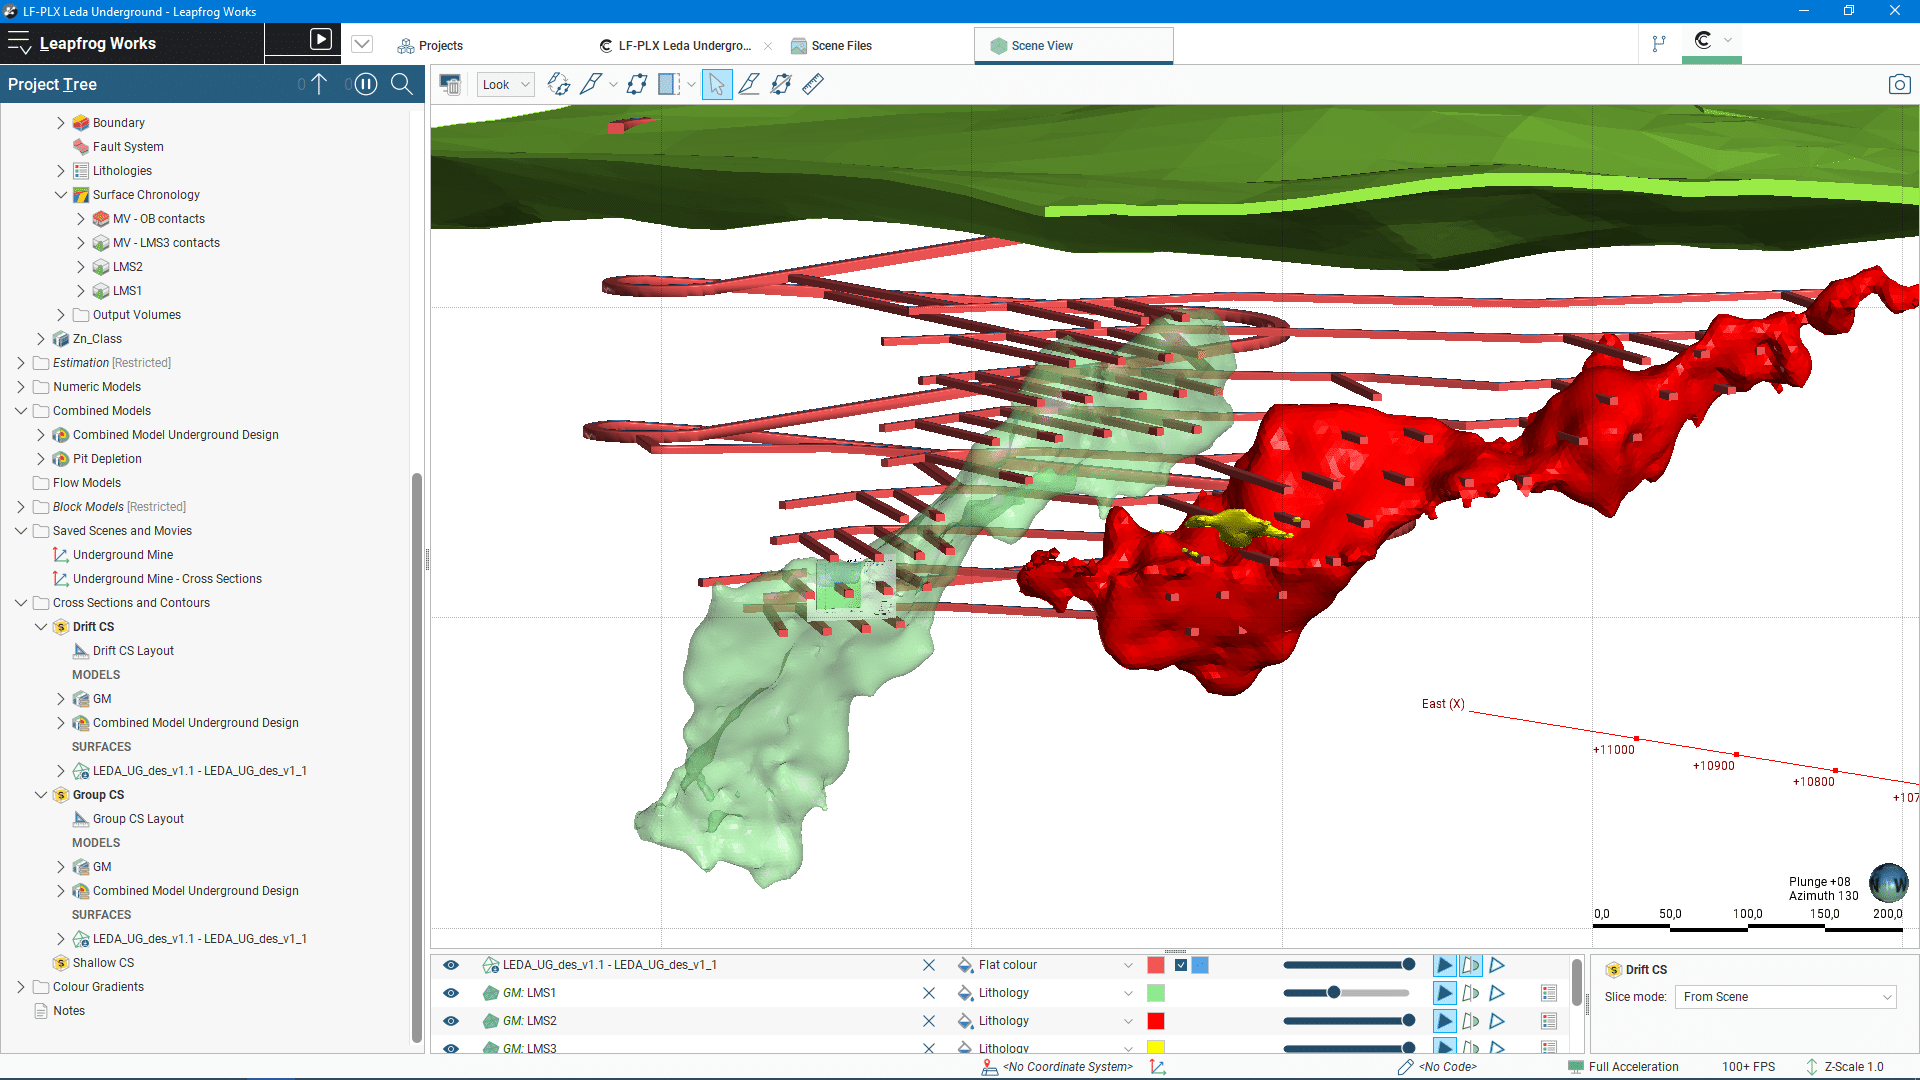 A screenshot of a Scene View of a 3D subsurface model in Seequent's Leapfrog Works